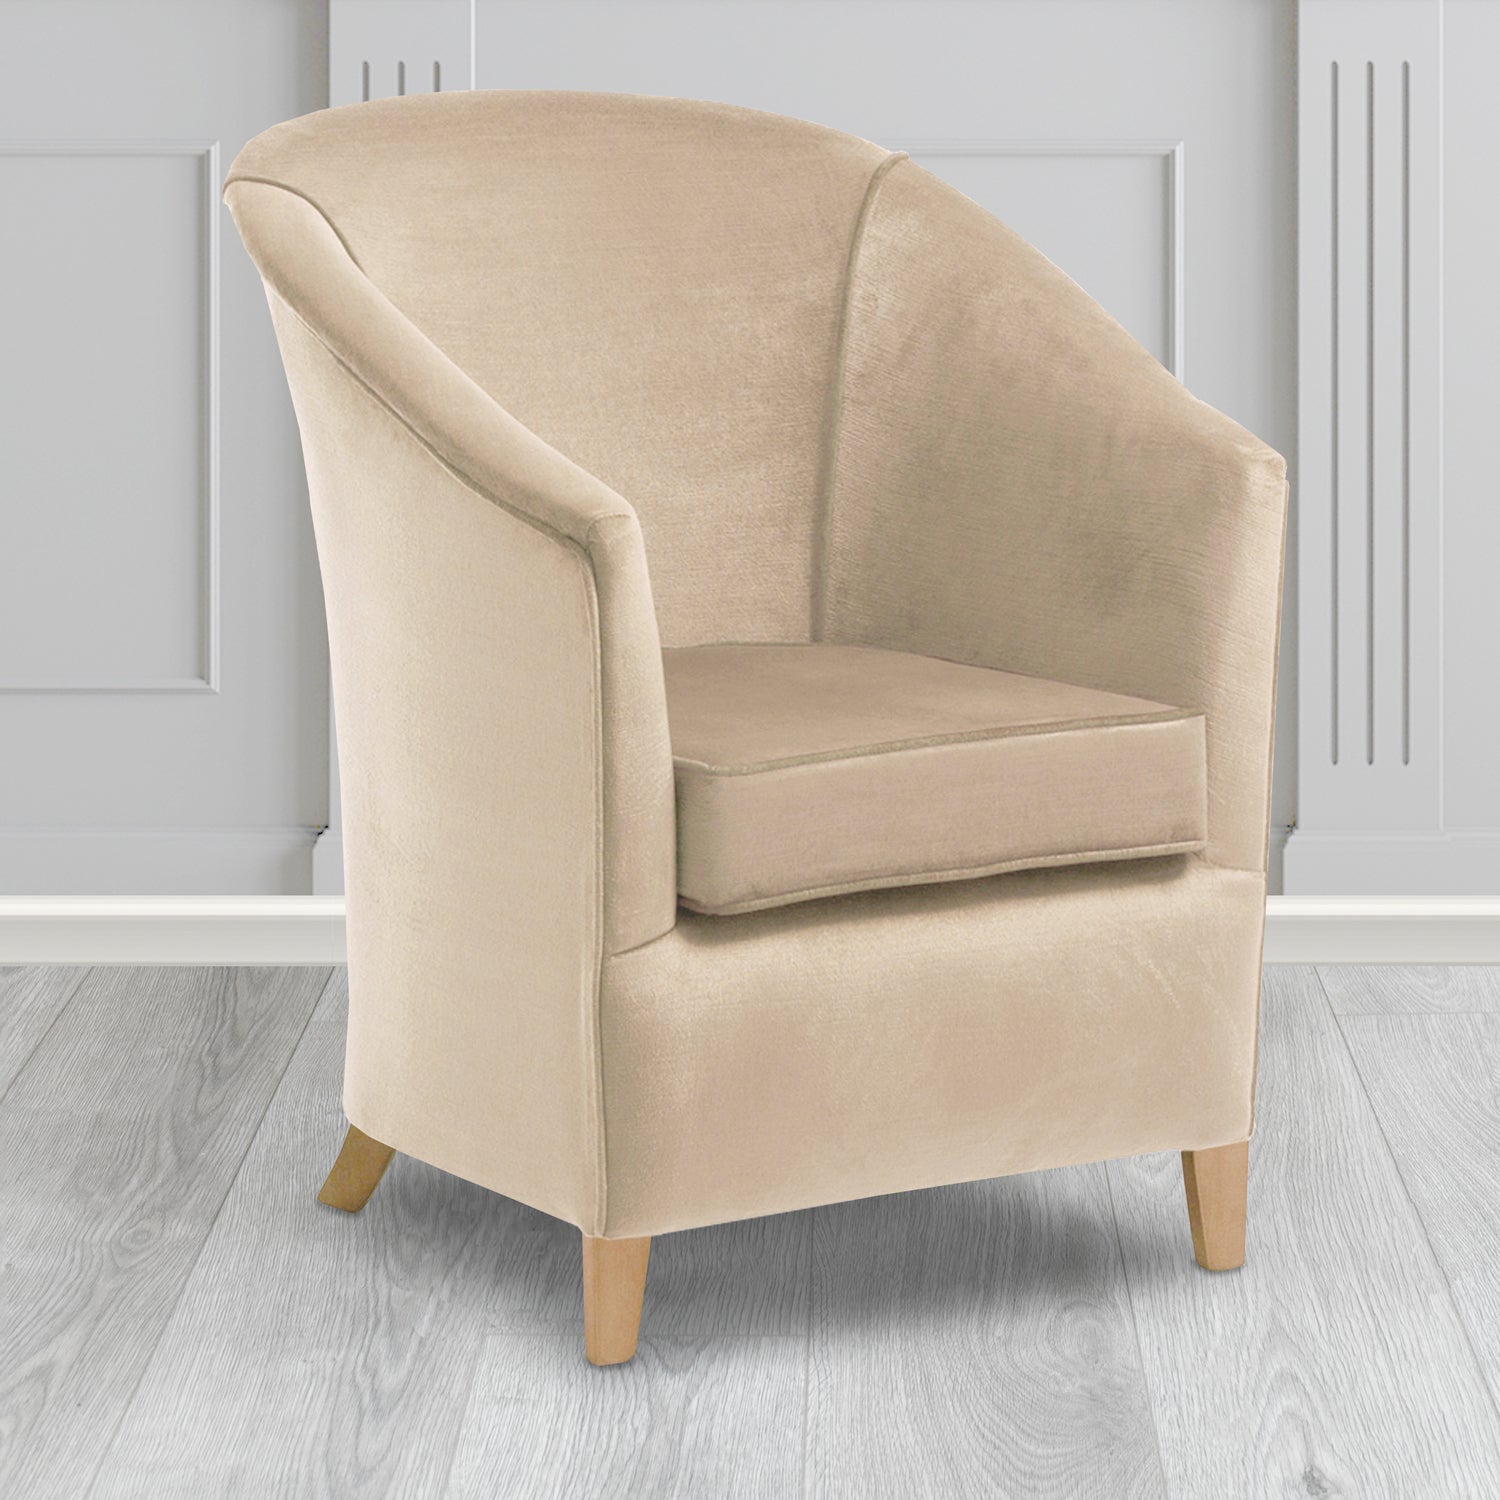 Bolton Tub Chair in Noble 837 Stone Crib 5 Velvet Fabric - Water Resistant - The Tub Chair Shop